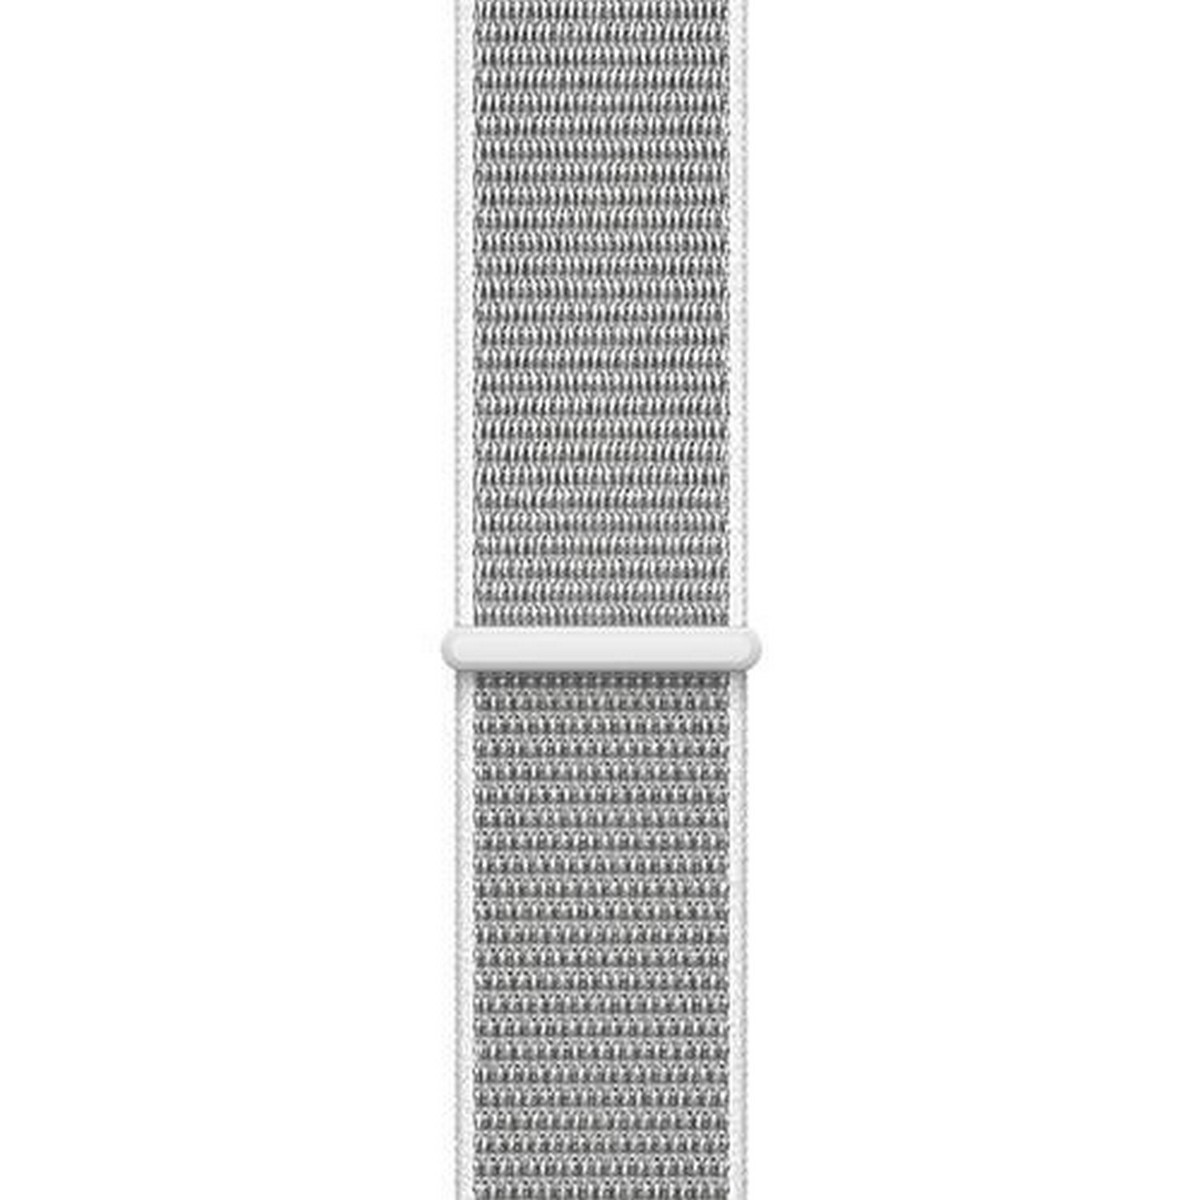 Apple Watch Series 3 (GPS + Cellular) MQKQ2 Silver Aluminum Case with Seashell Sport Loop 42mm